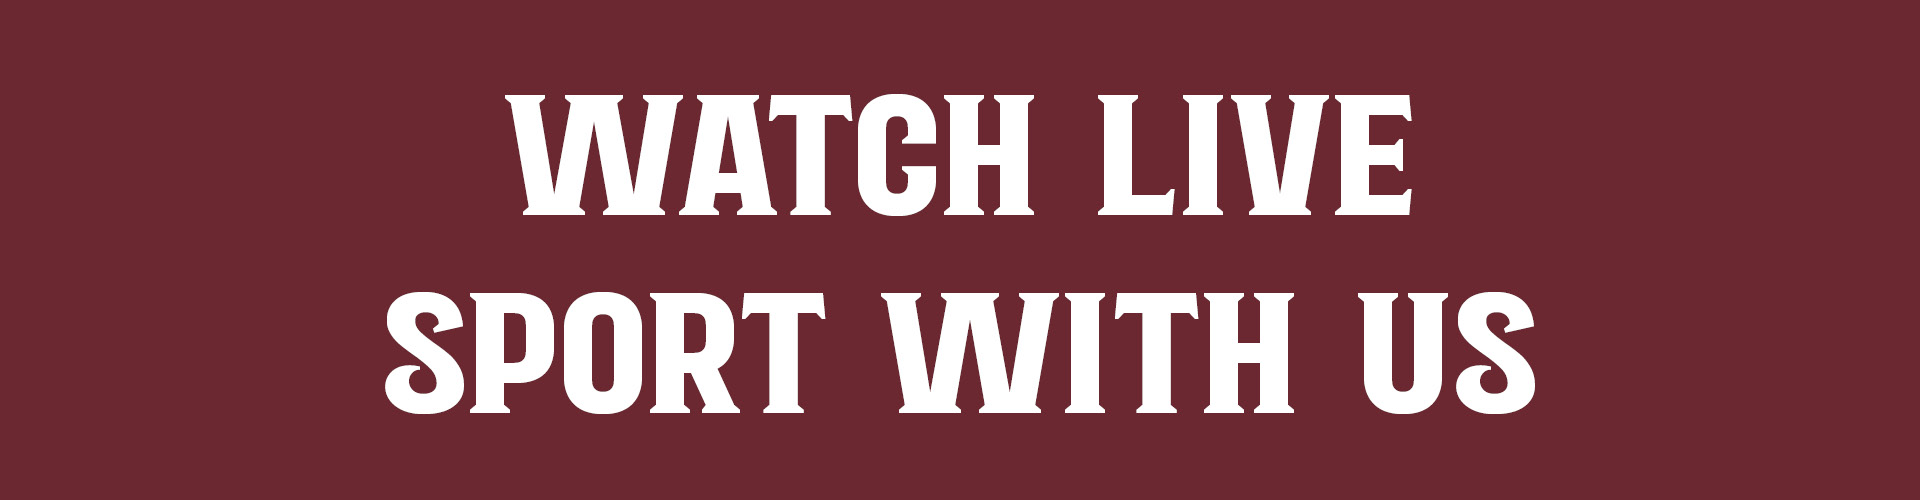 Watch live sport in Blackpool at The Manchester pub